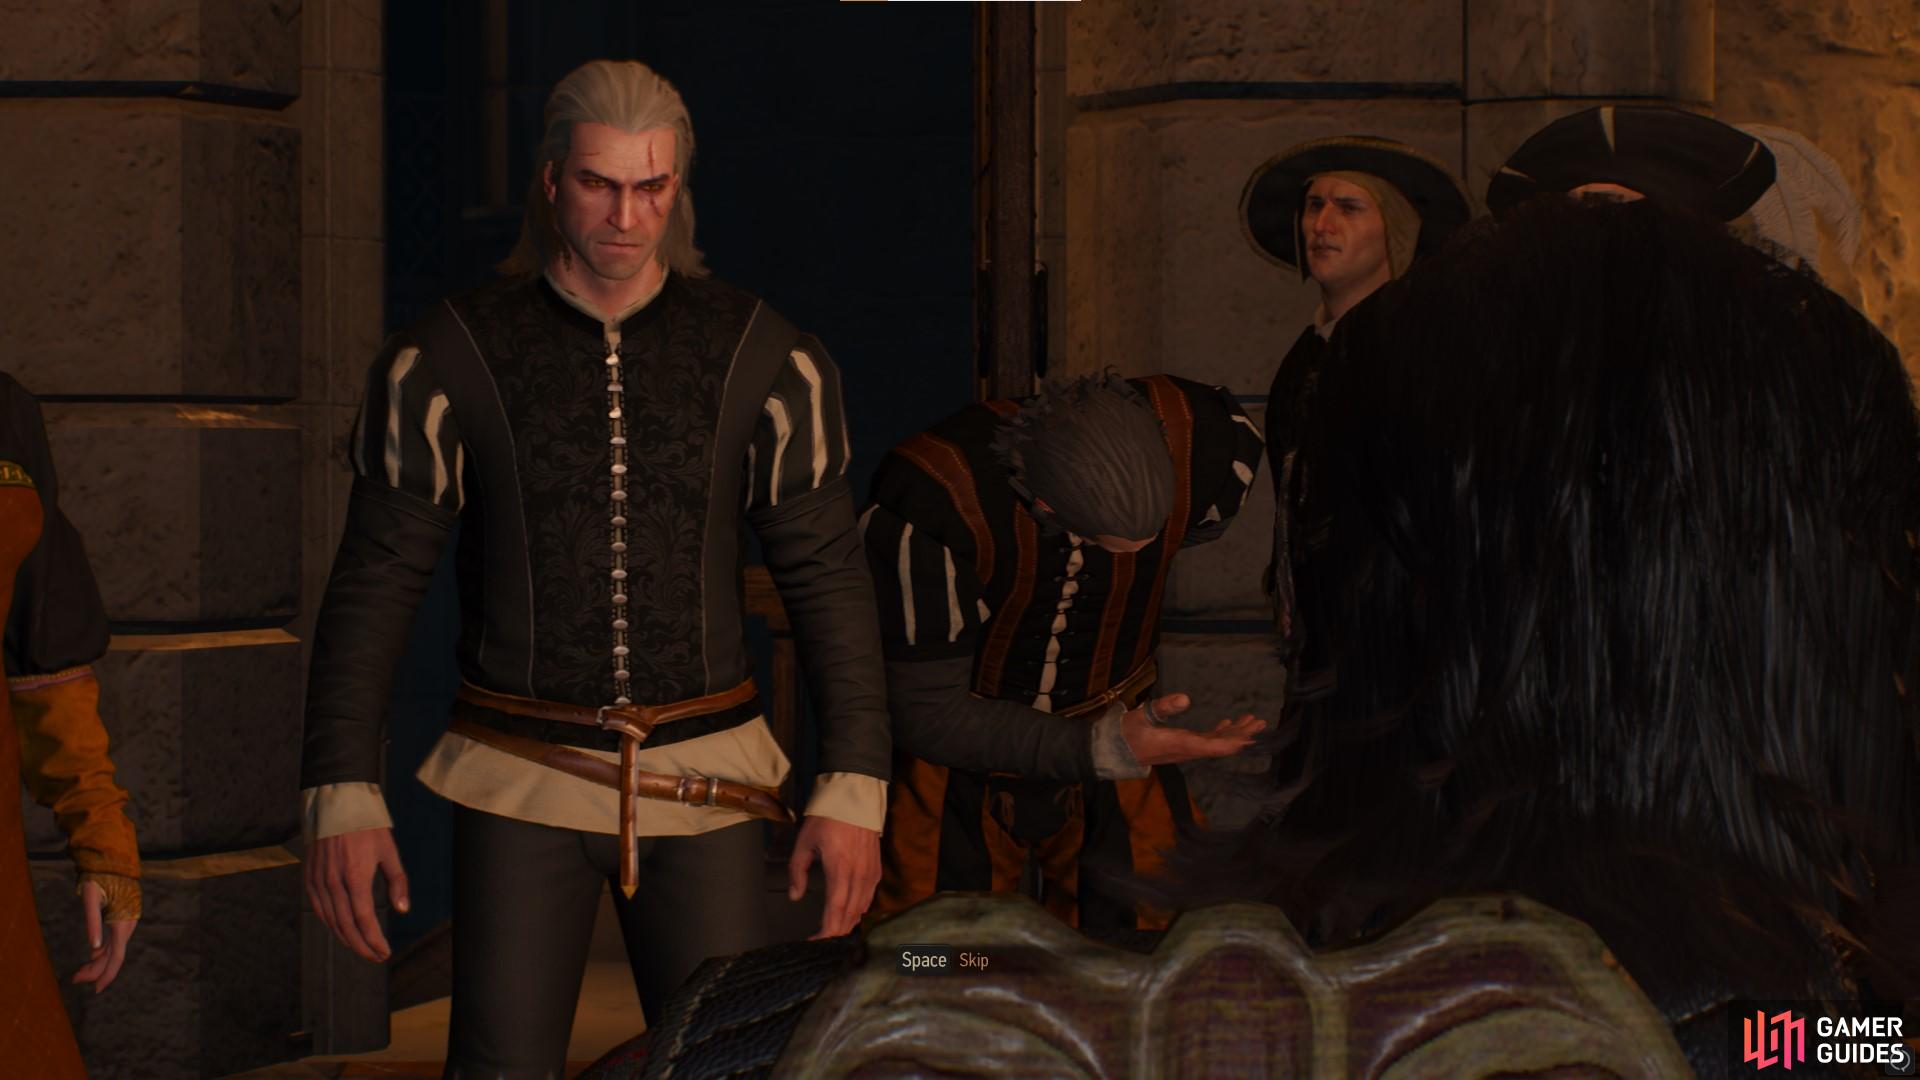 The Witcher 2 Mysterious Merchant, If he isn't in your game…